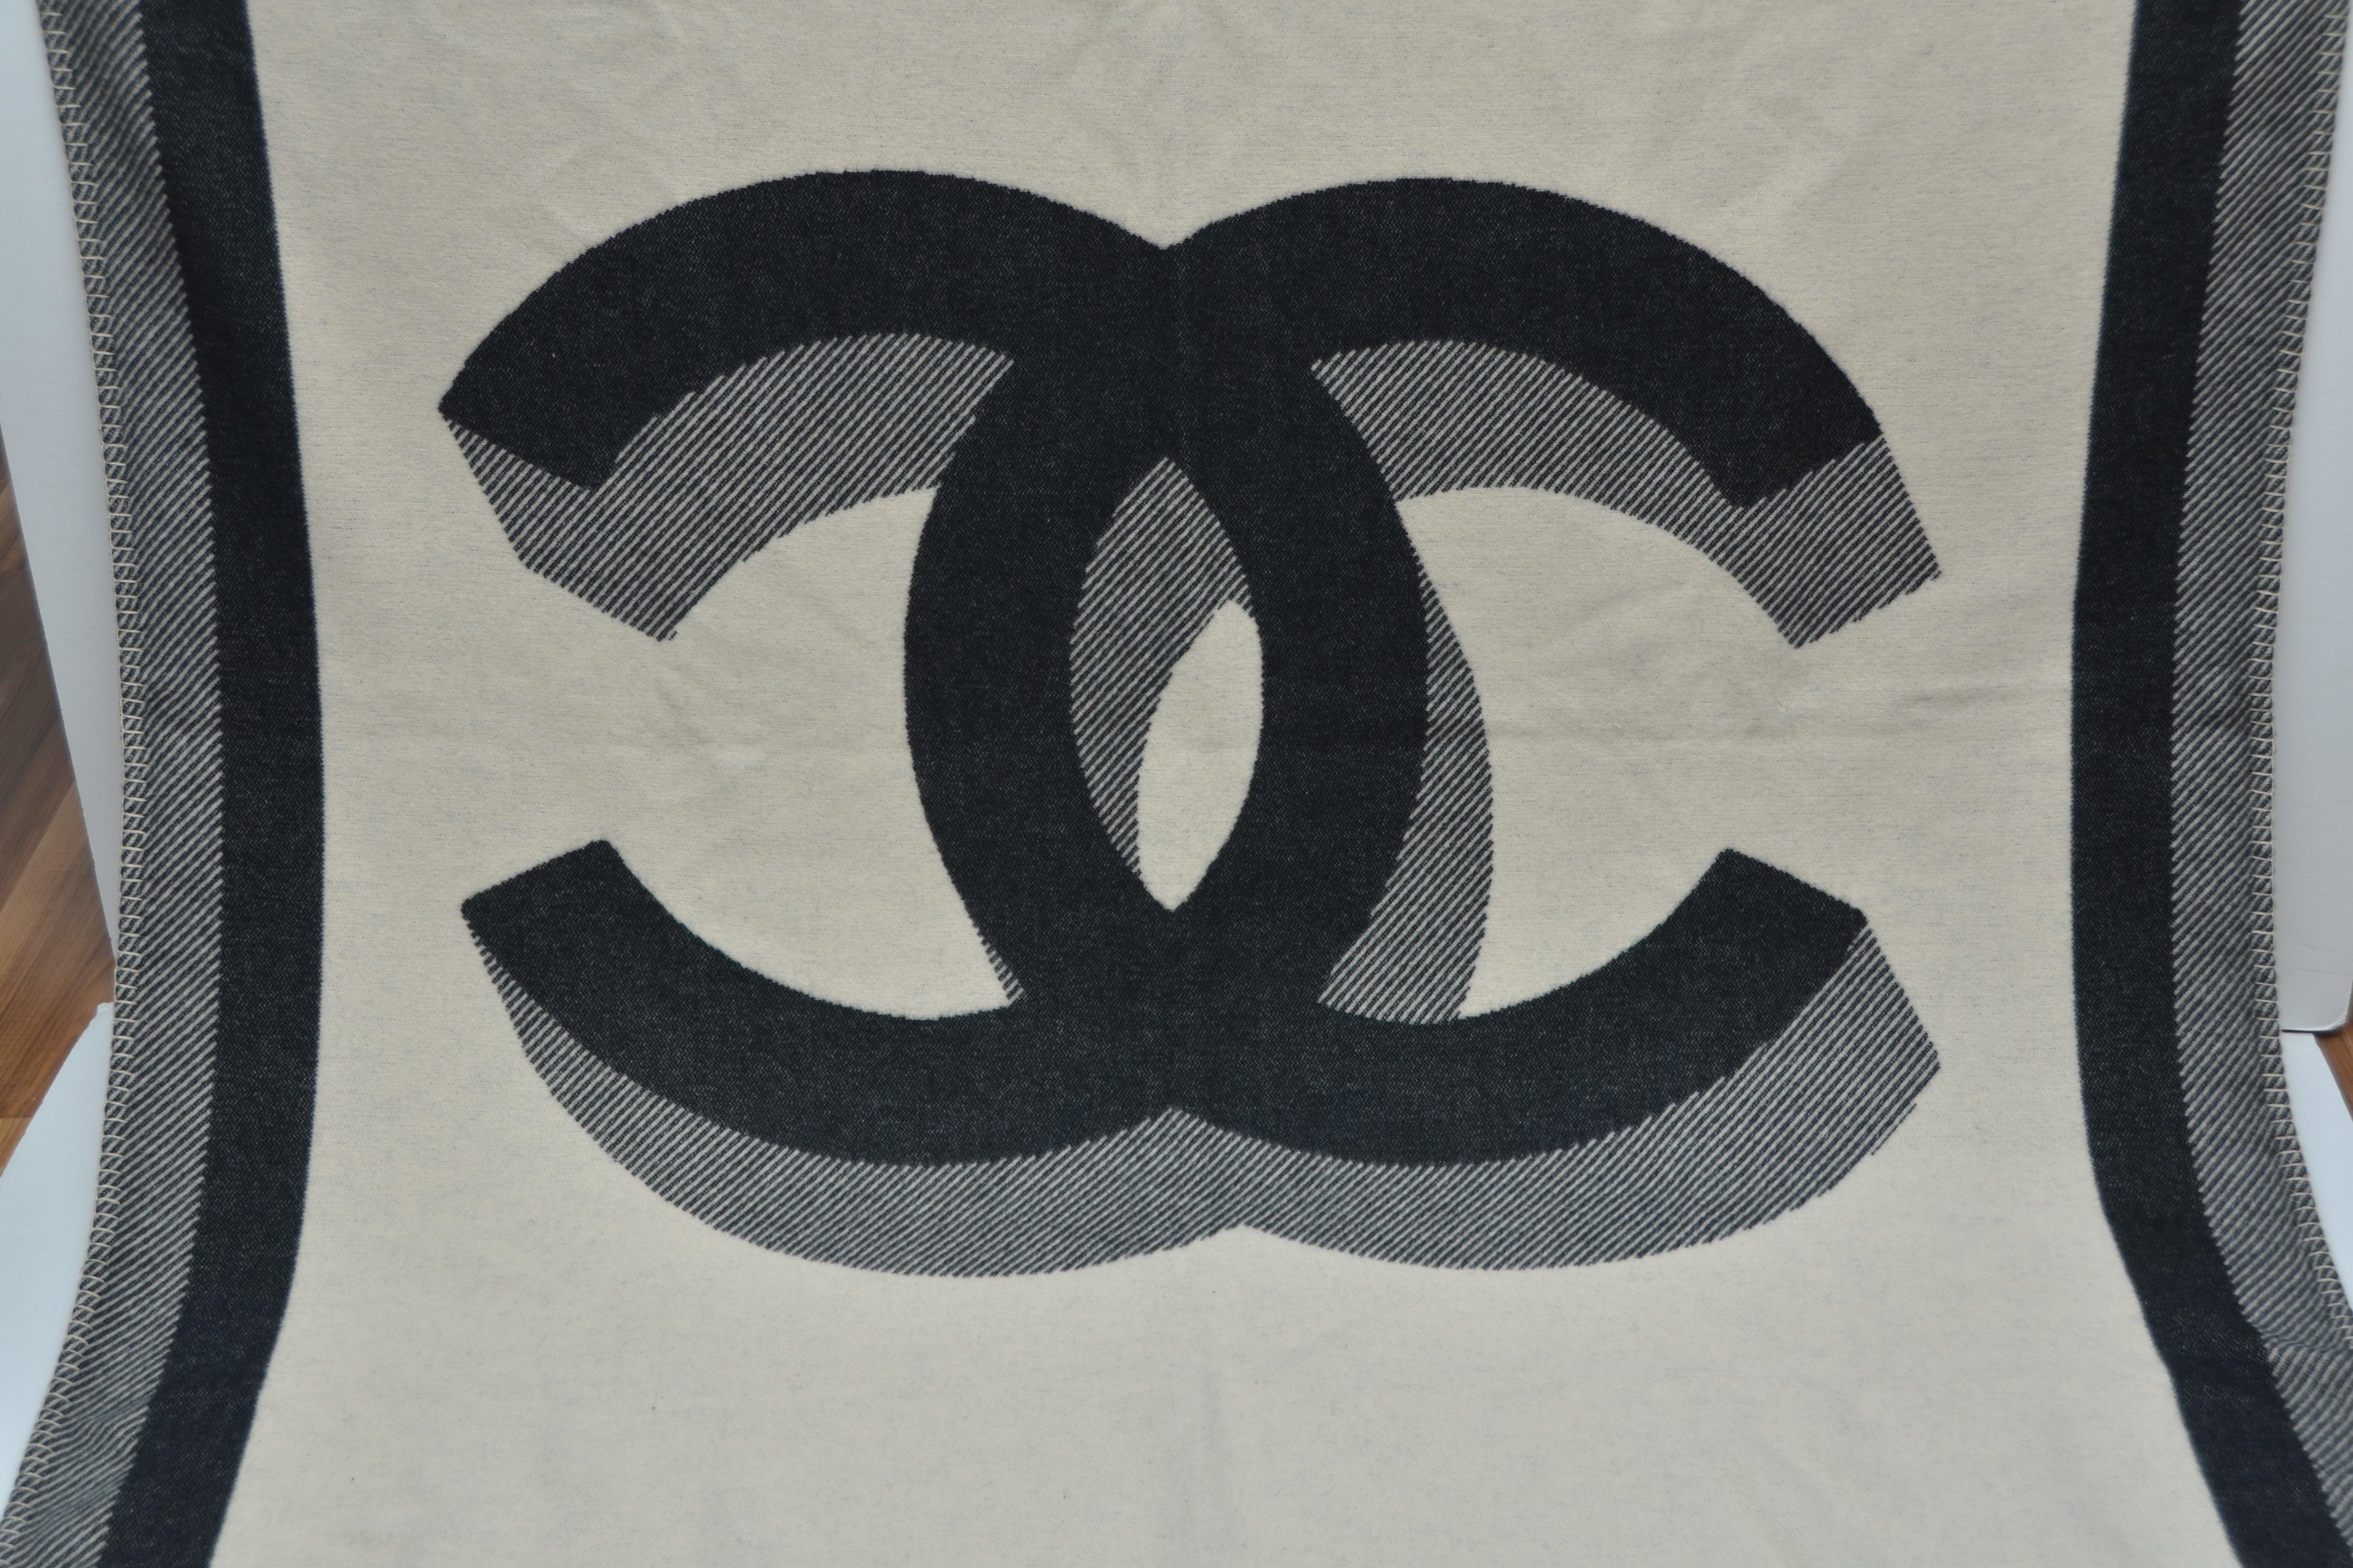 Chanel travel rug, throw or blanket
New with Chanel dust-bag and tags
Two different sides with large CC 
Approximate measure: 74' X 55